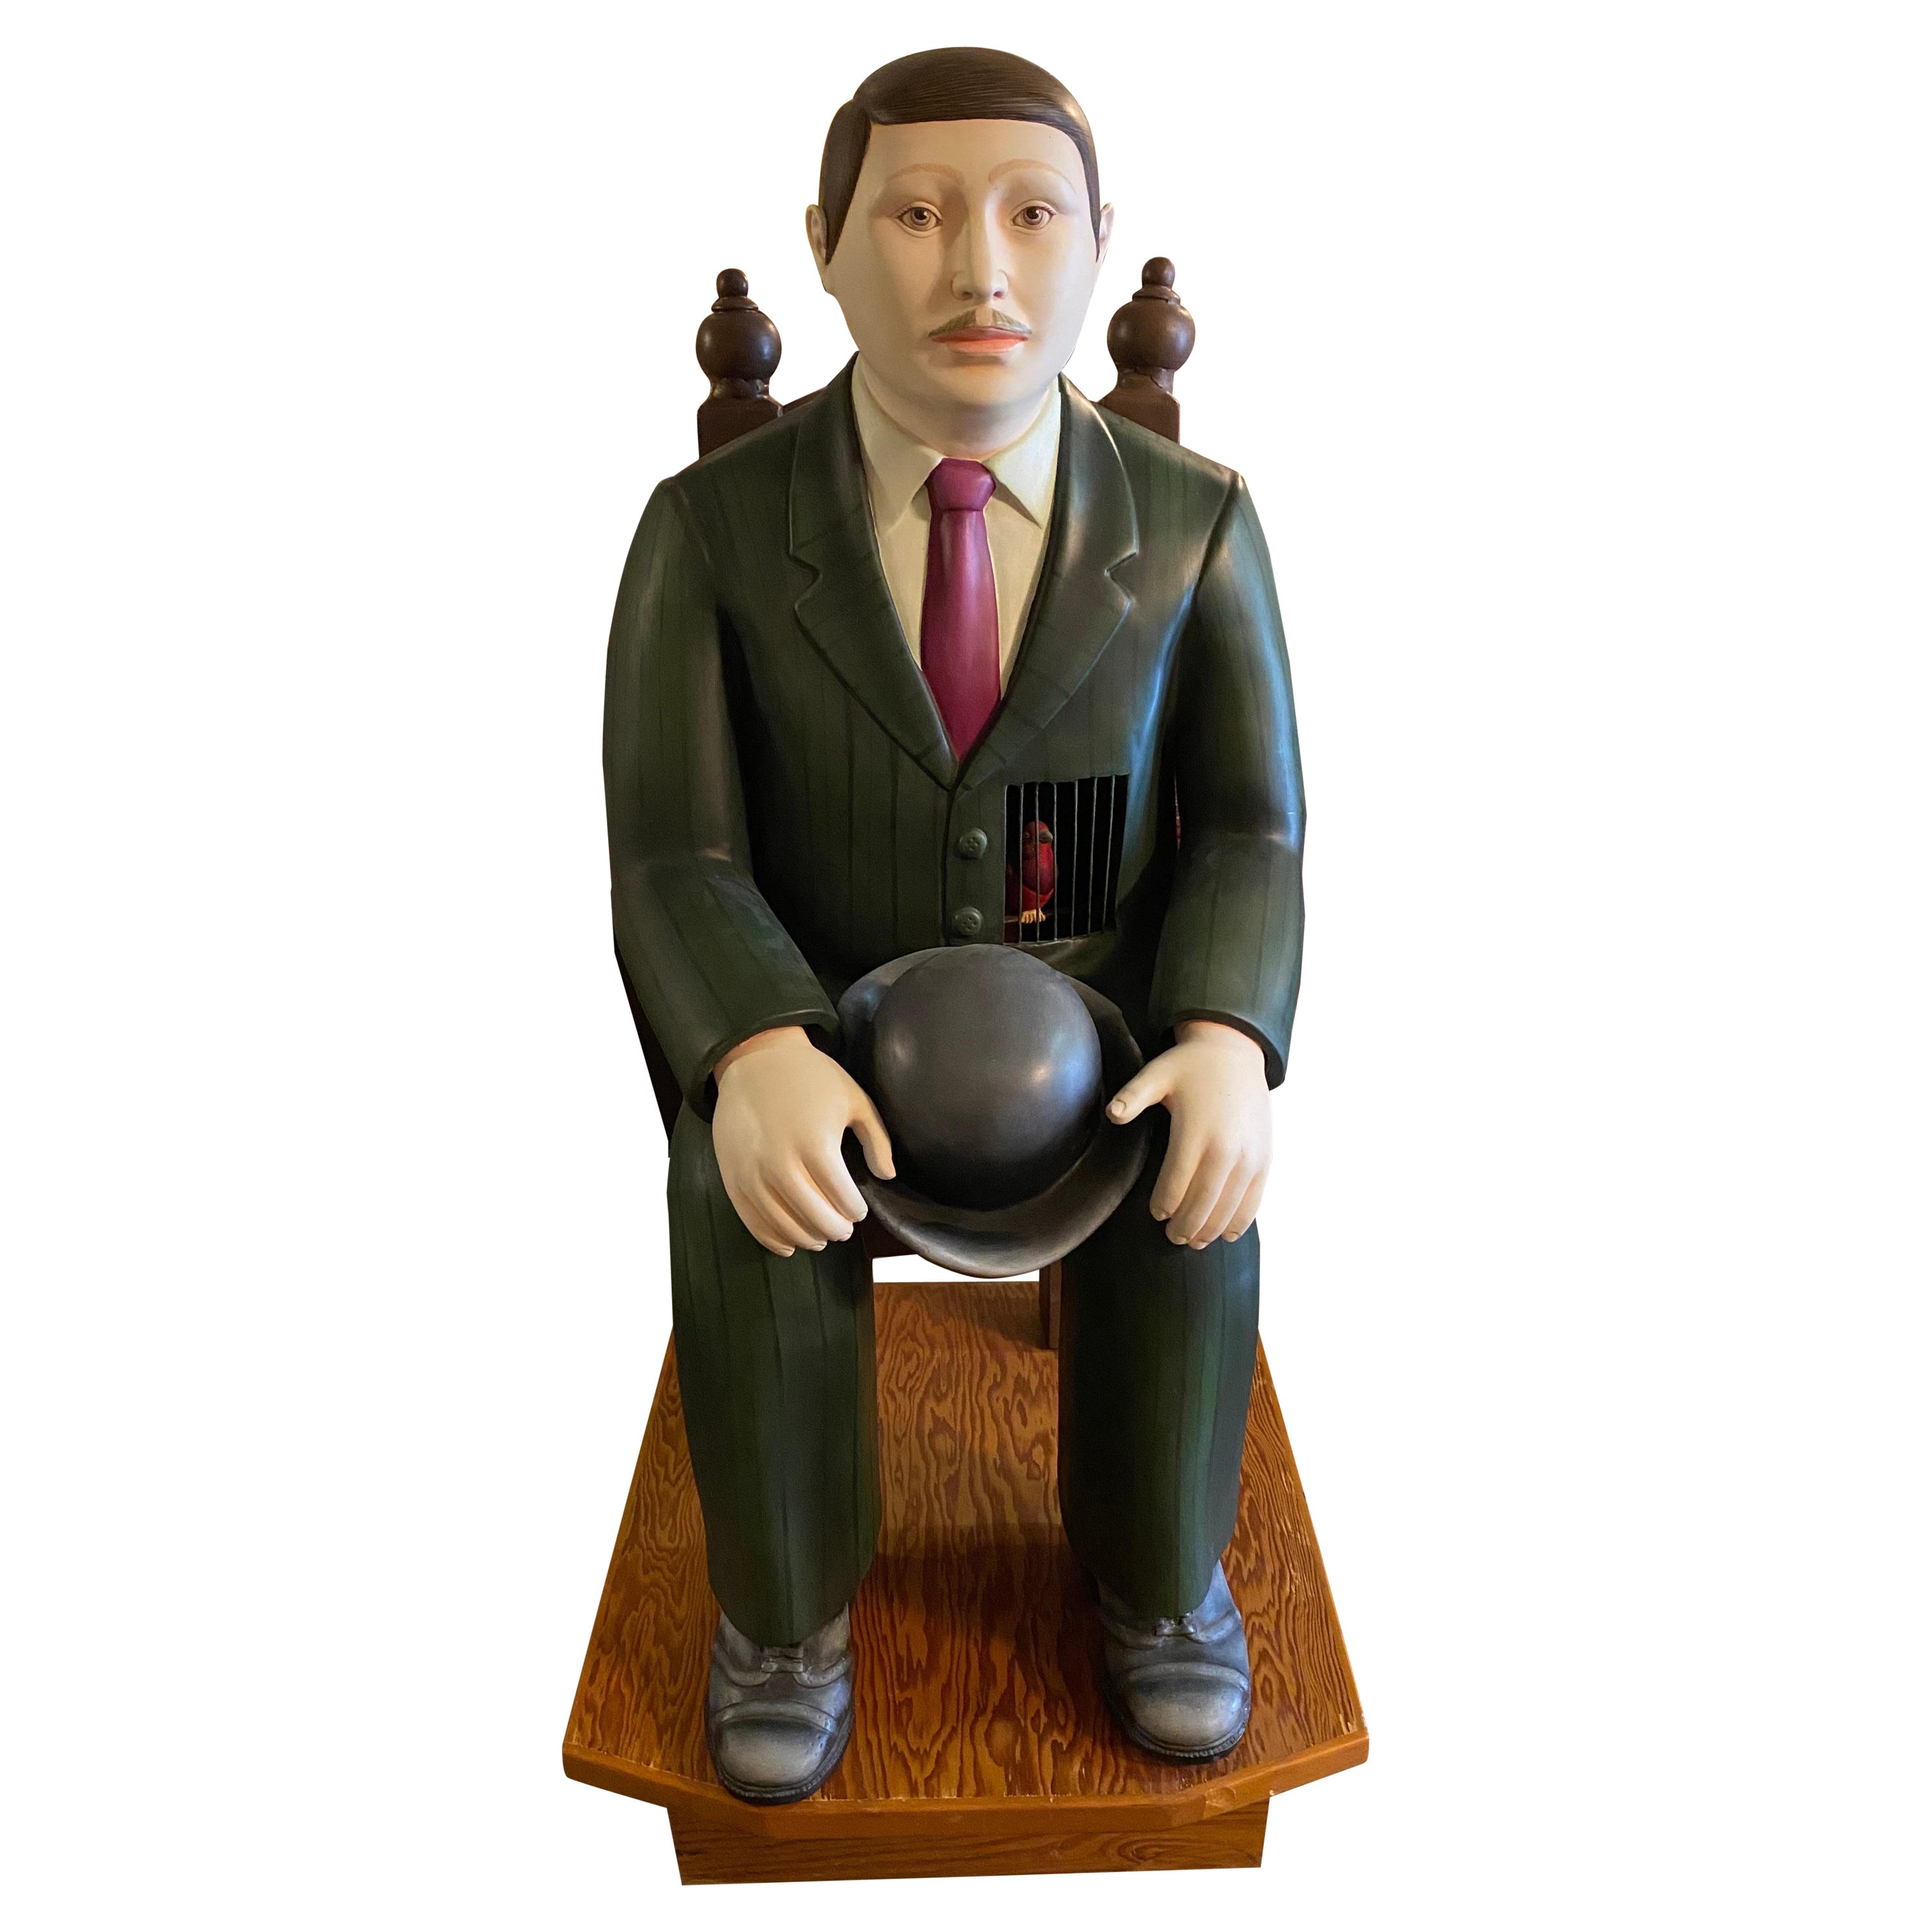 One-of-a-kind Artist Proof Life-sized Ceramic Sculpture by Sergio Bustamante